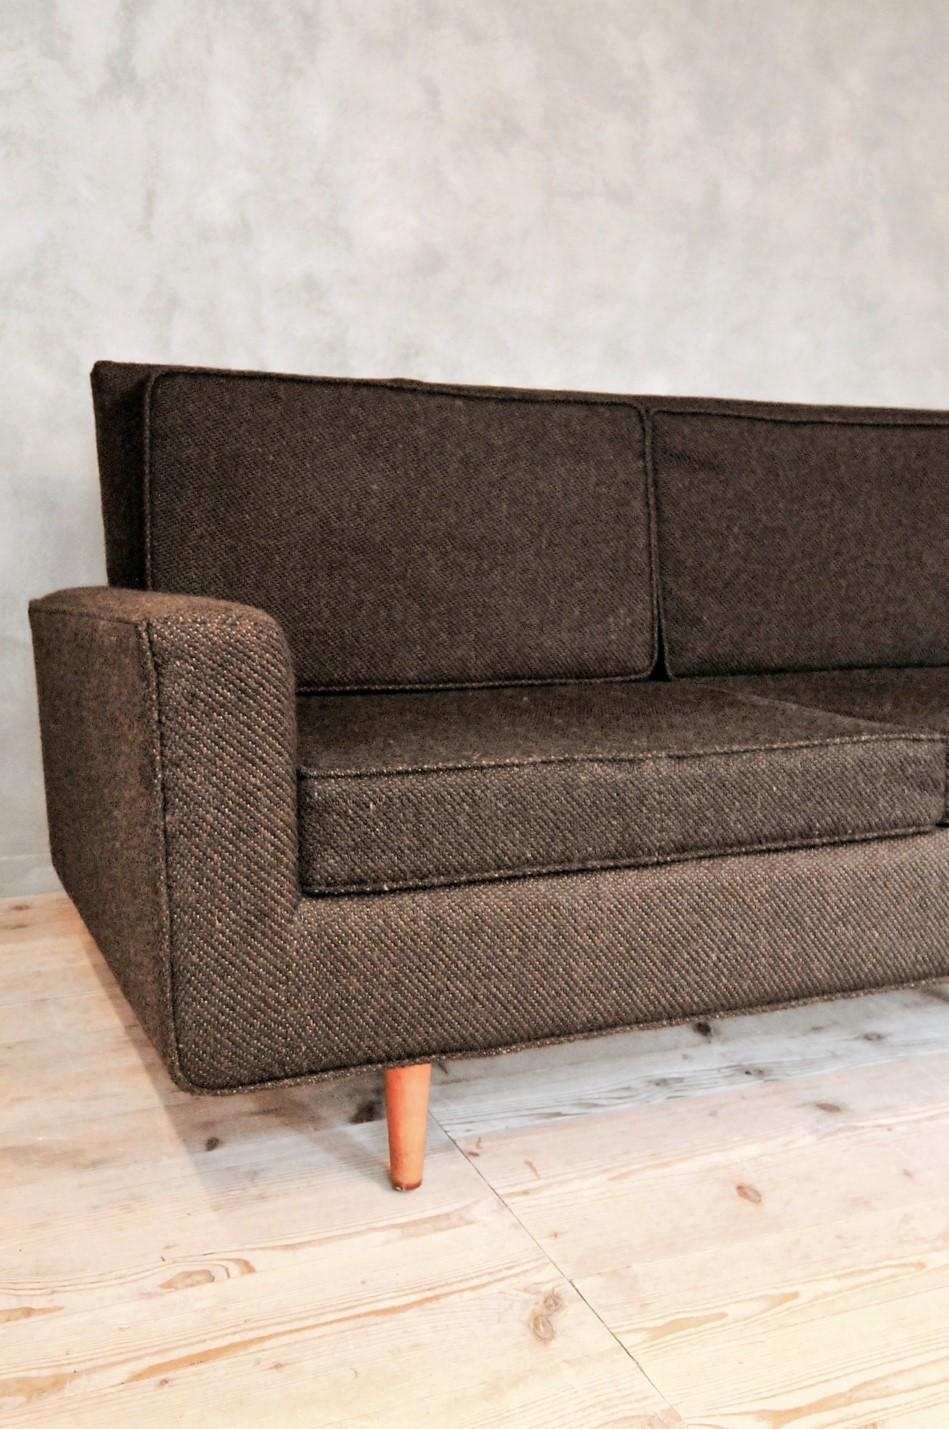 This iconic sofa is one of the first designs by Florence Knoll, created in 1947. It has a simple line and is considered one of the most comfortable models of the designer. It comes from first hand, was always very well-kept and reupholstered with